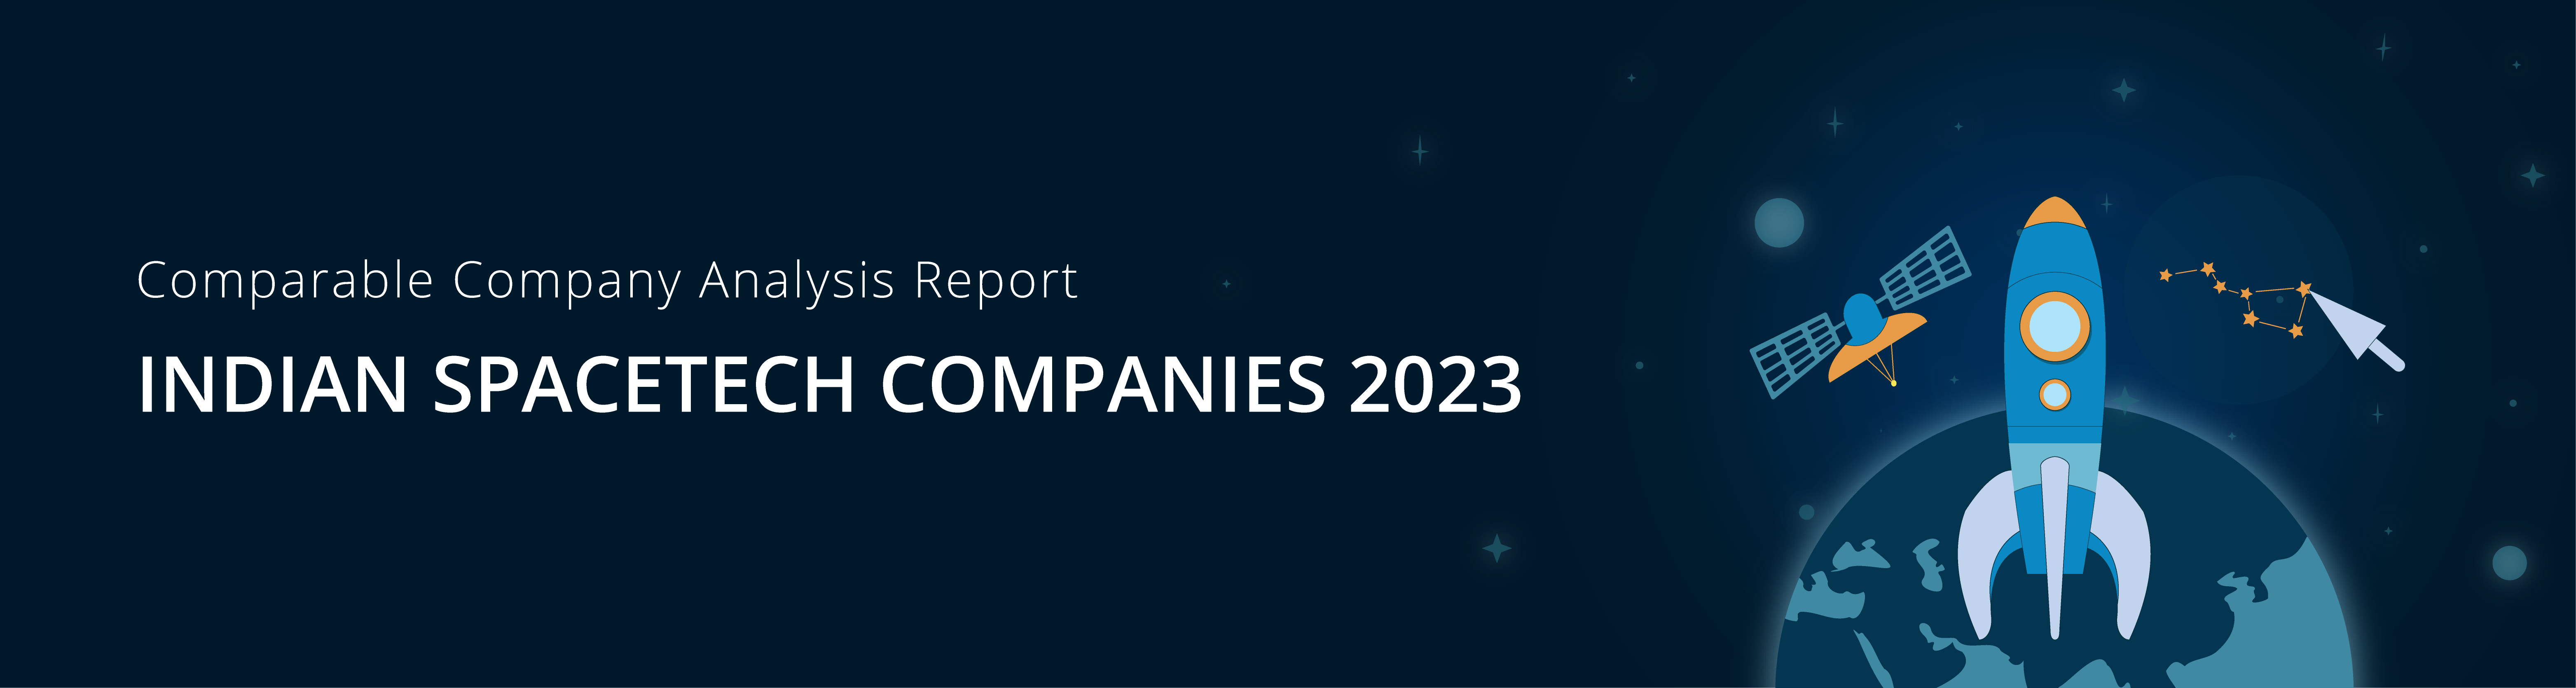 Comparable Company Analysis Report: Indian Spacetech Companies 2023.